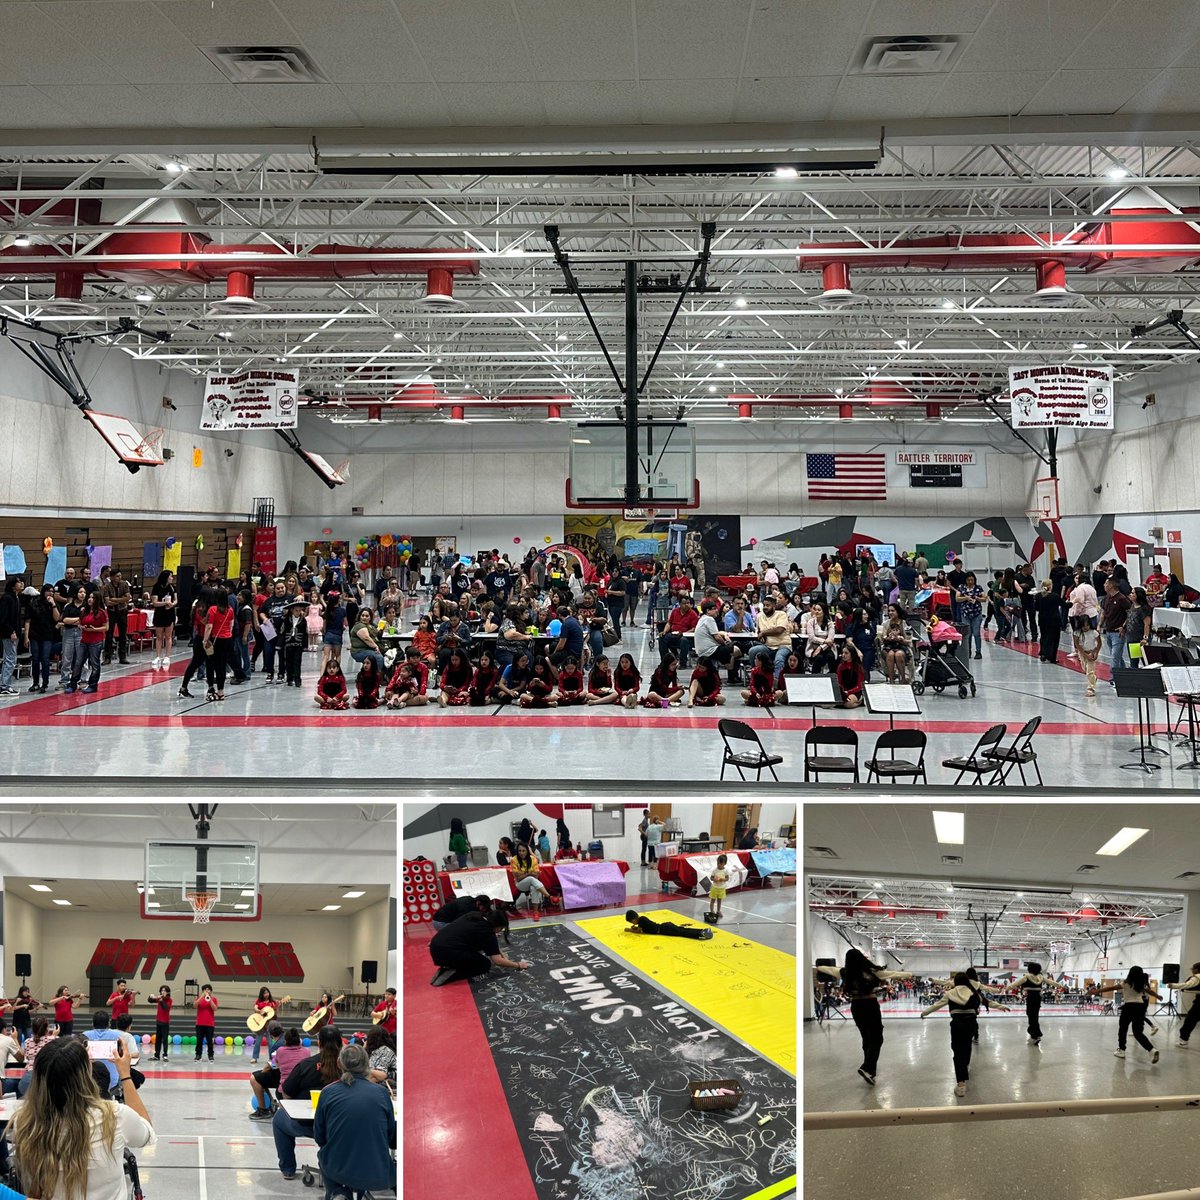 EMMS Viva la Fiesta! Got to meet our future Rattlers and show them what we’re all about 🐍🖤❤️ #STRIKE @EMMS_Gutierrez @Team_EMMS @PenaPaulette12